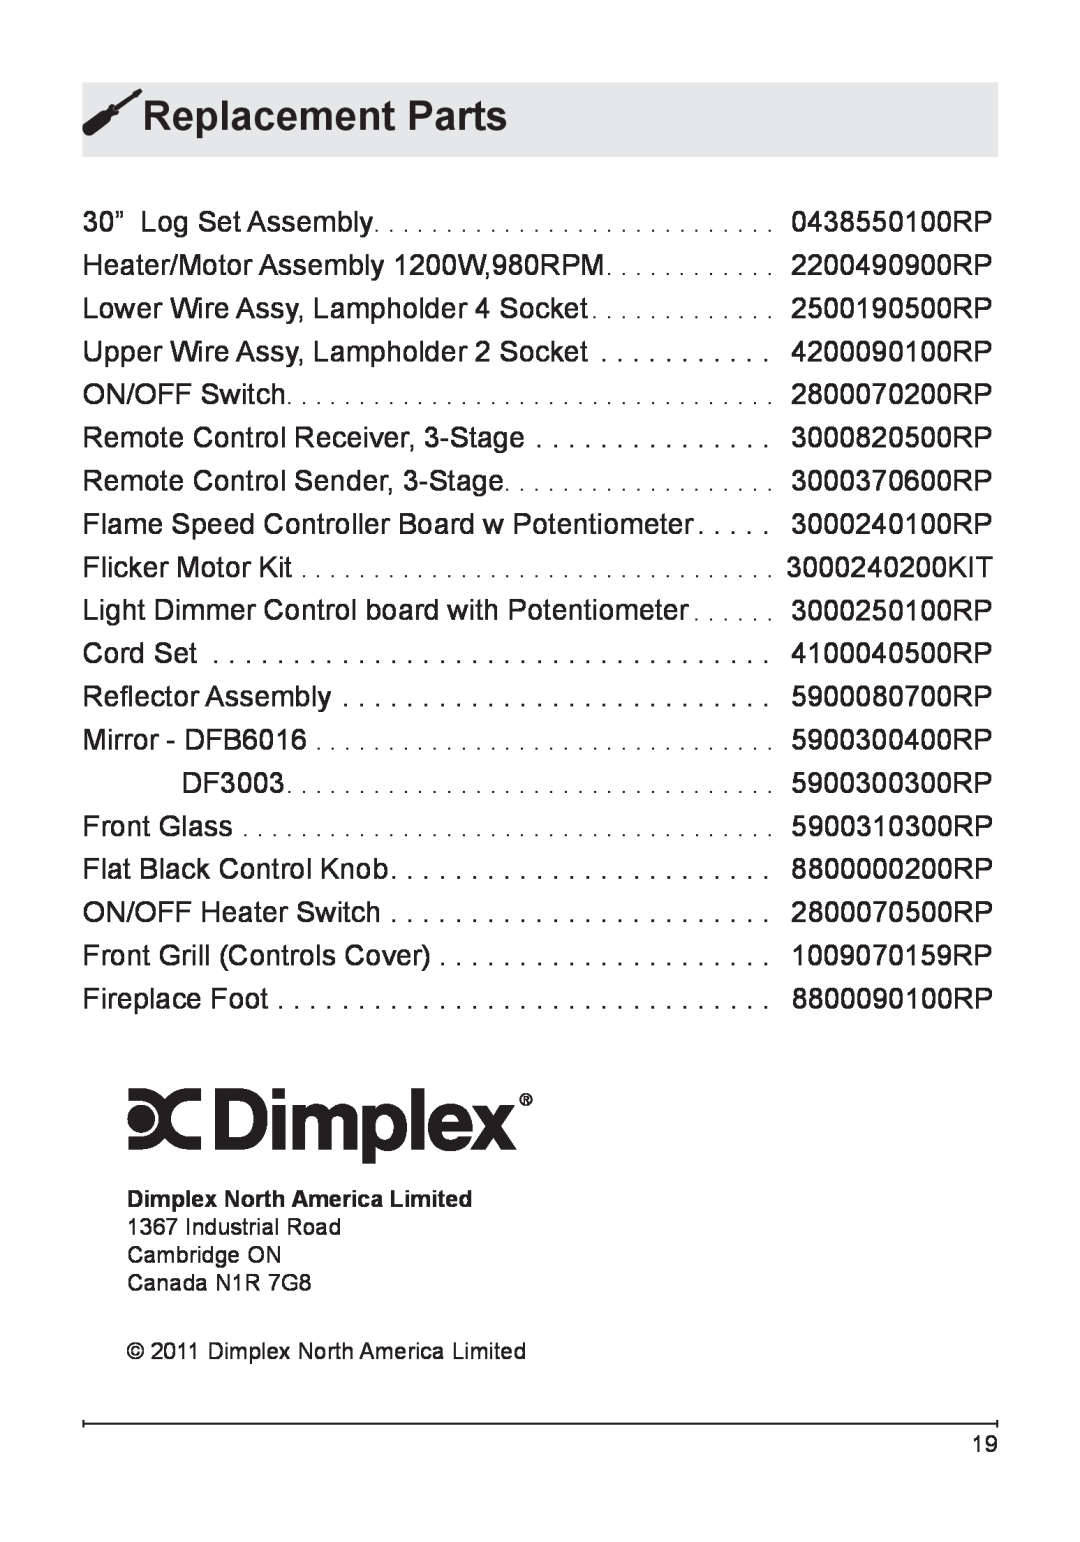 Dimplex DF3003 owner manual Replacement Parts, Dimplex North America Limited 